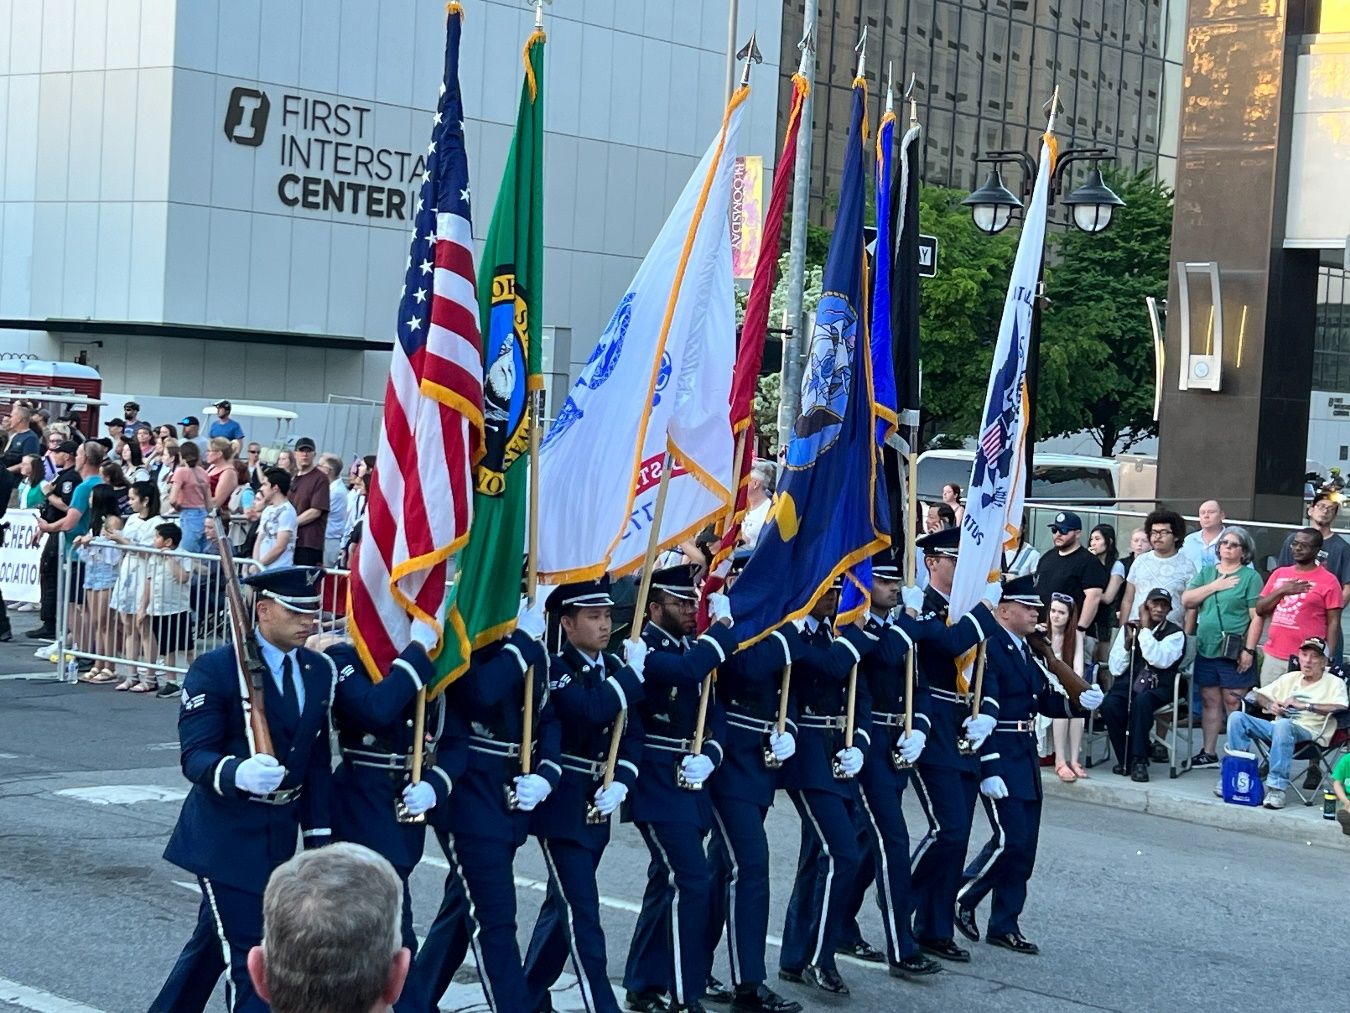 A group of people in uniform marching in a parade Description automatically generated